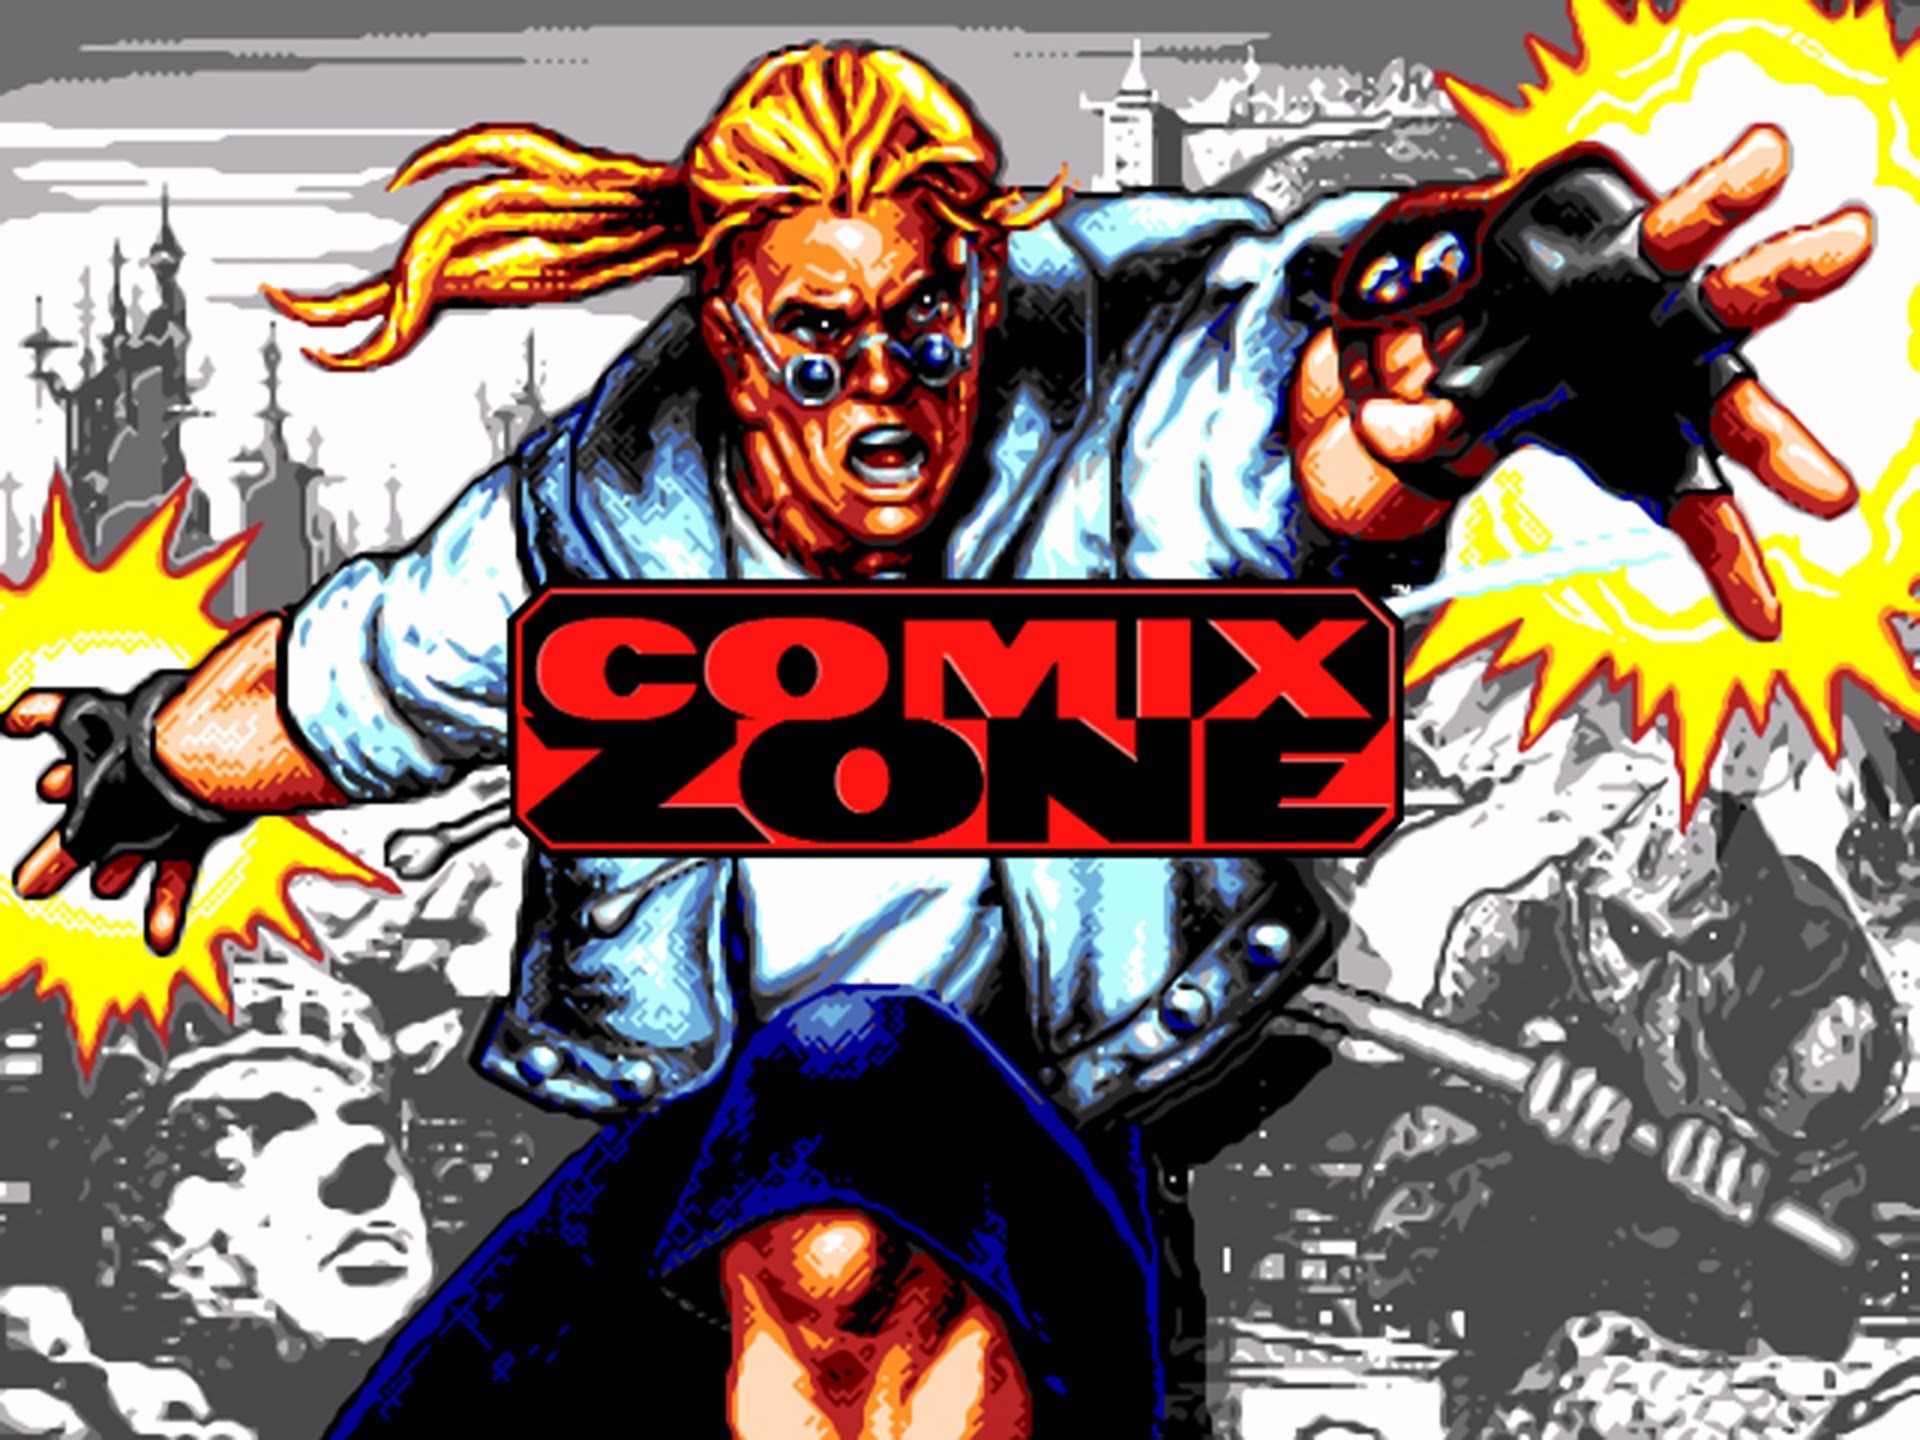 1920x1440 Comic Zone For Sega Genesis Is Brutally Difficult